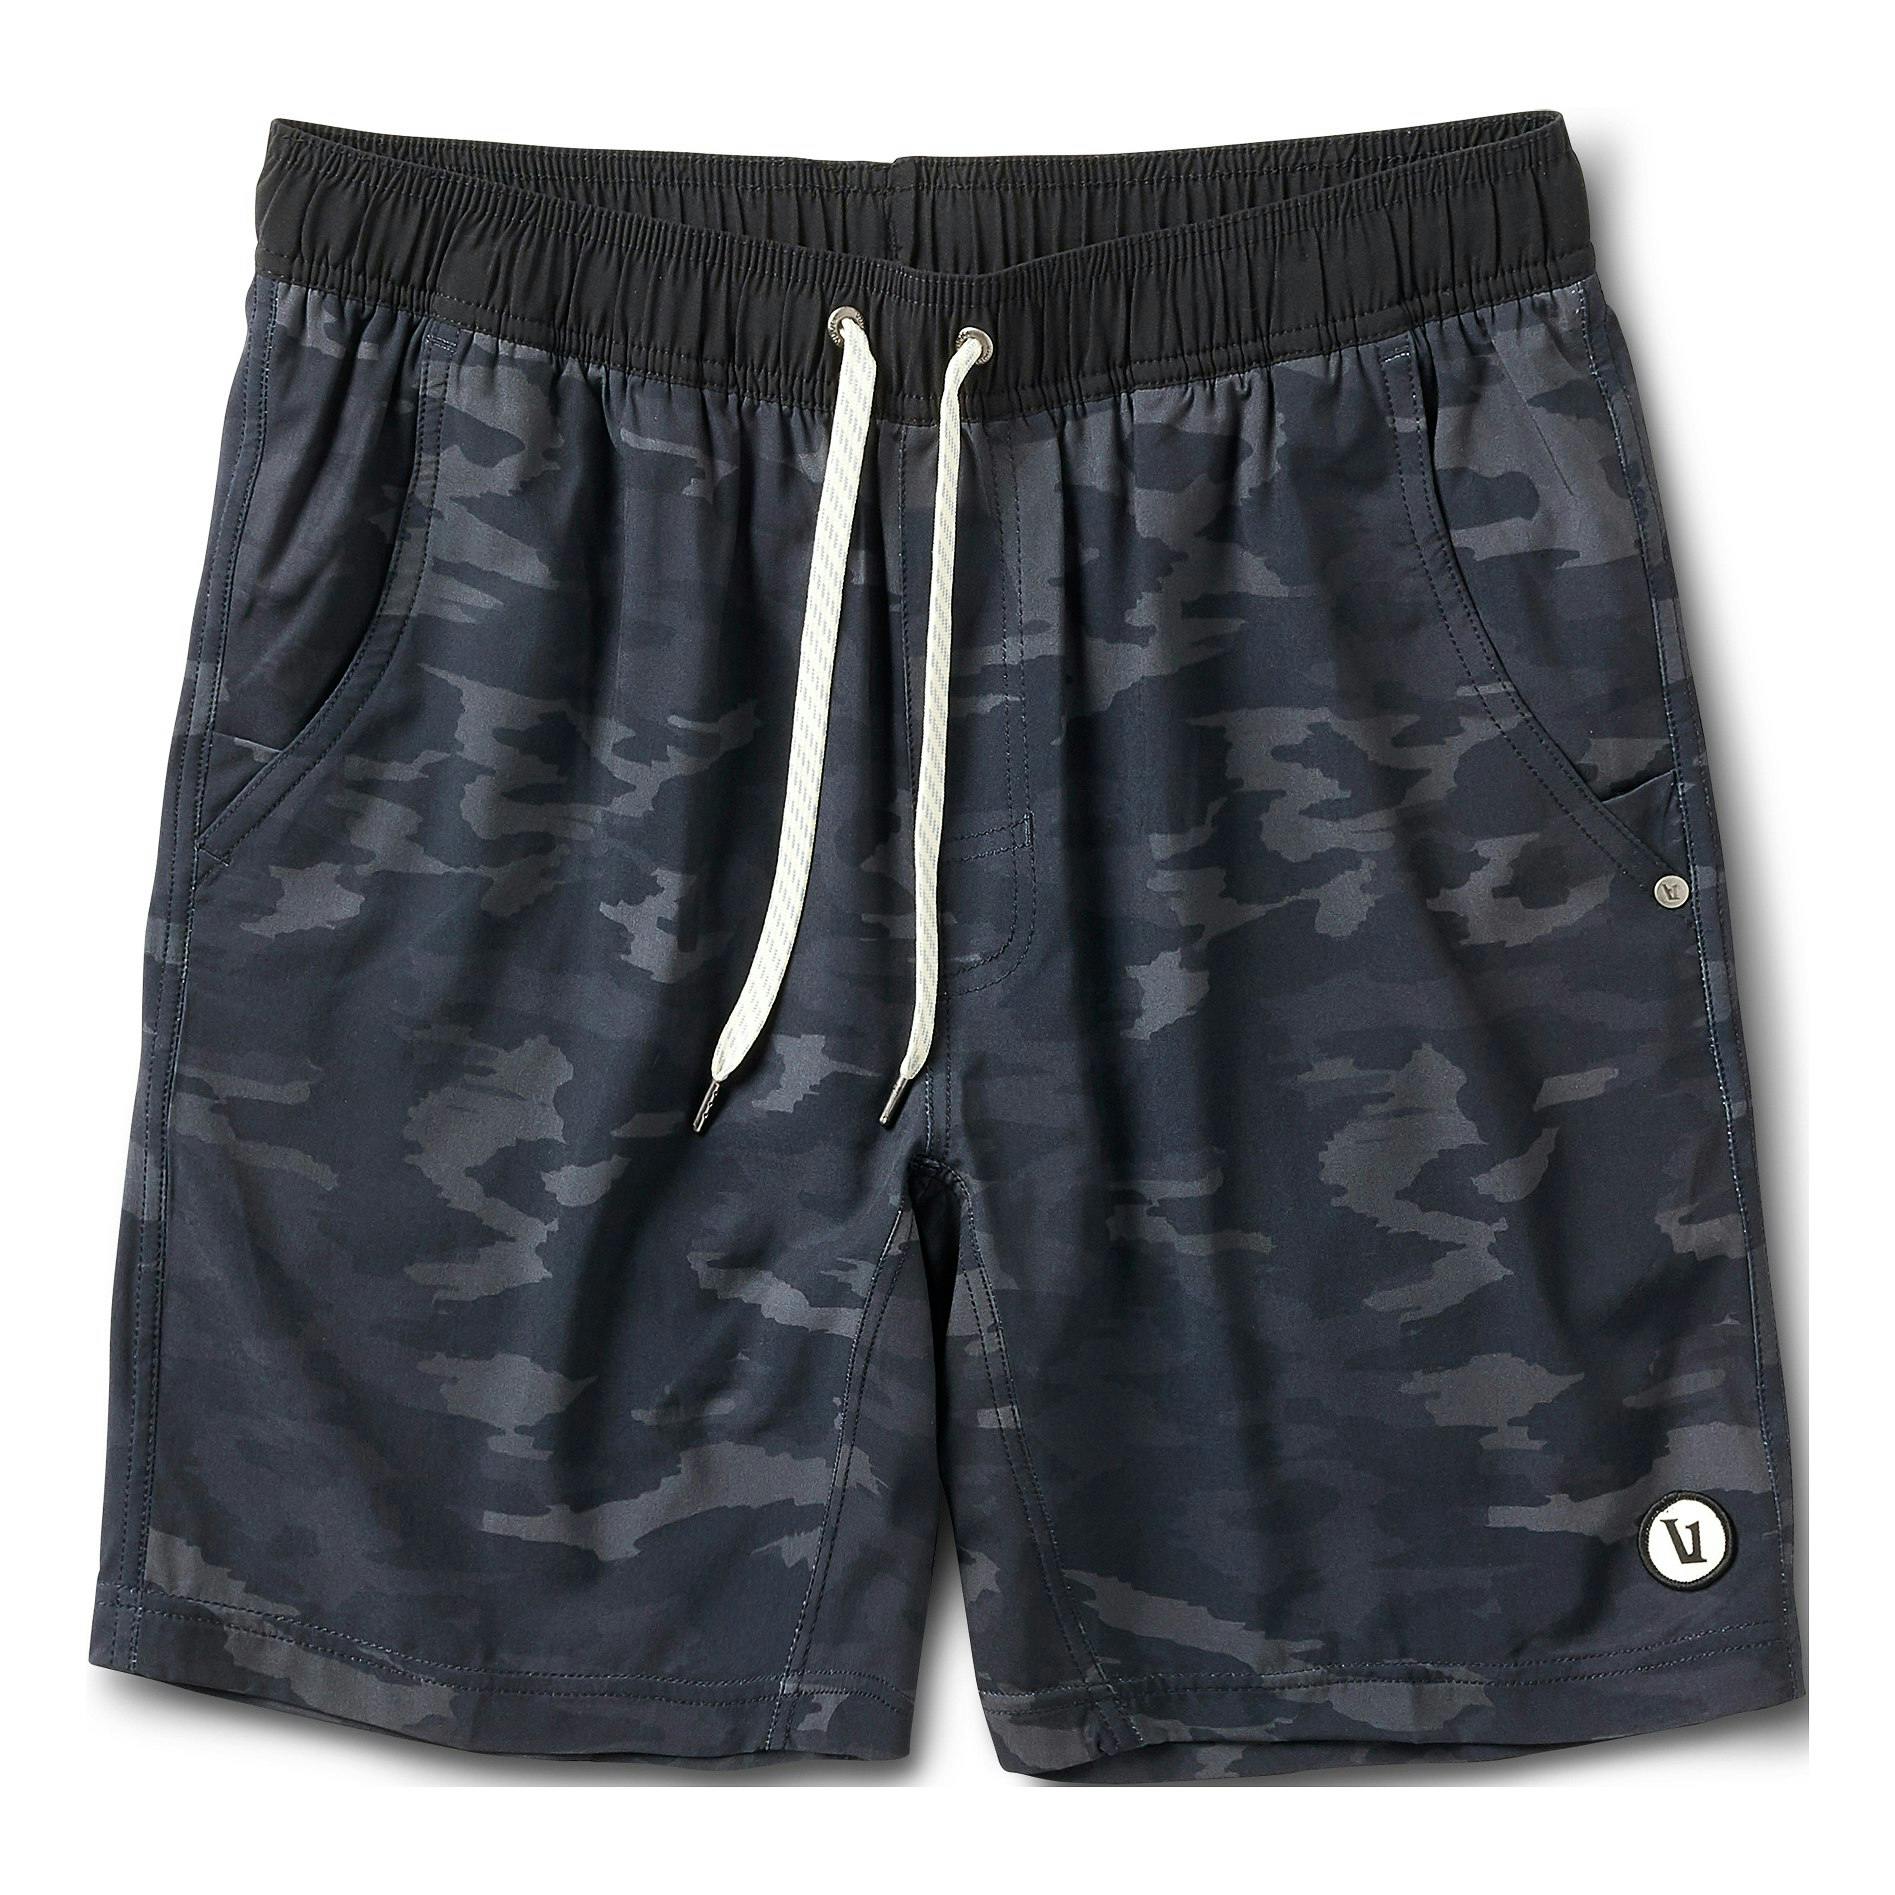 Kore Athletic Short - Lined 7.5"